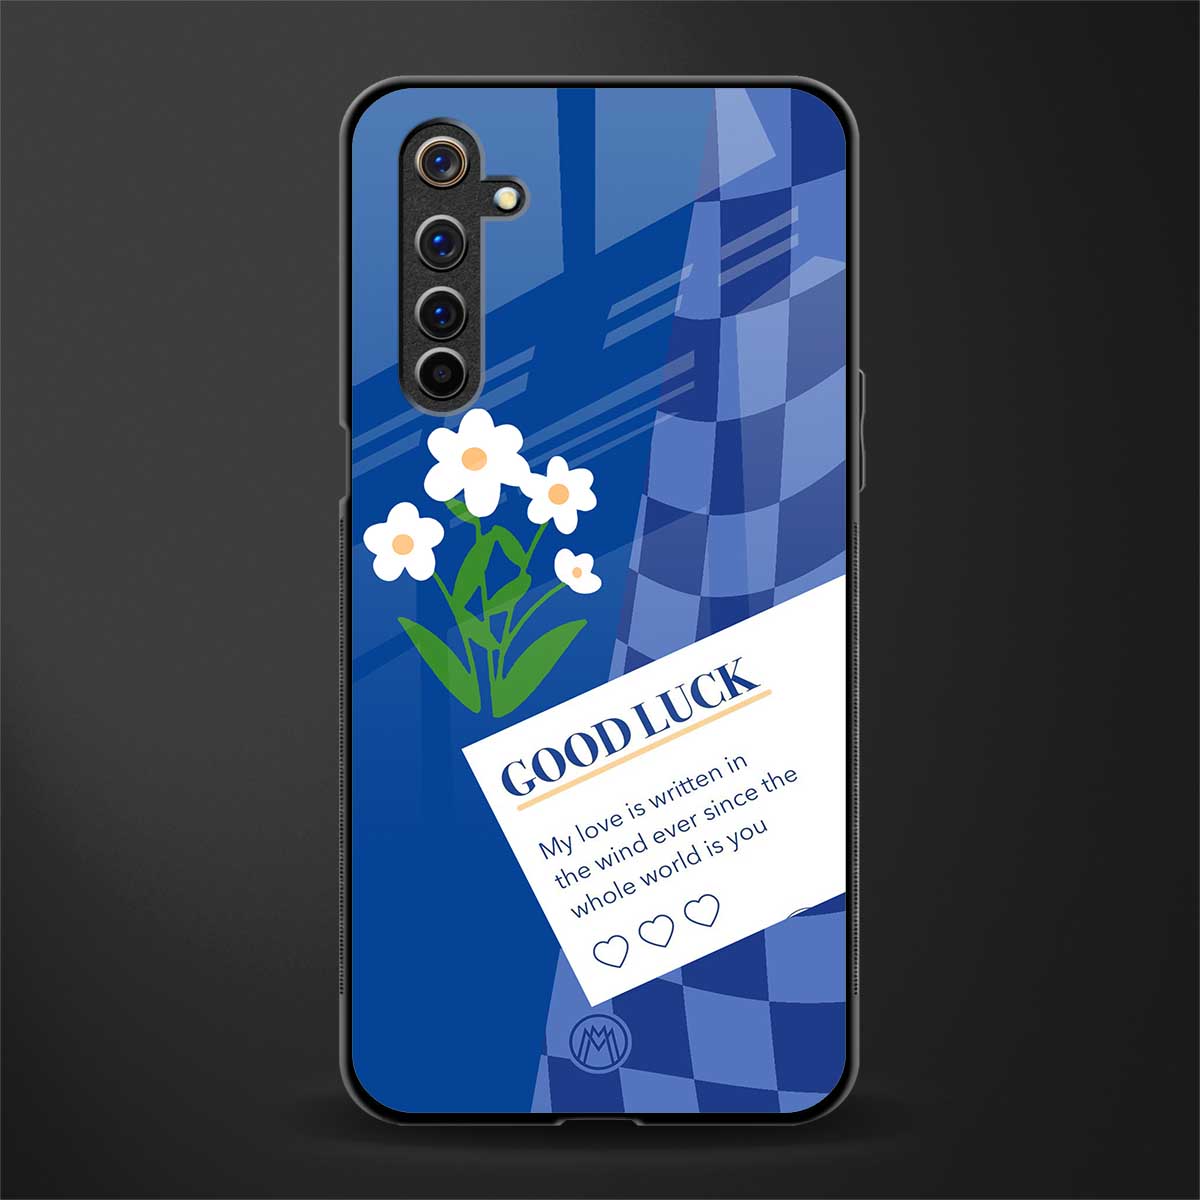 you're my world blue edition glass case for realme 6 pro image